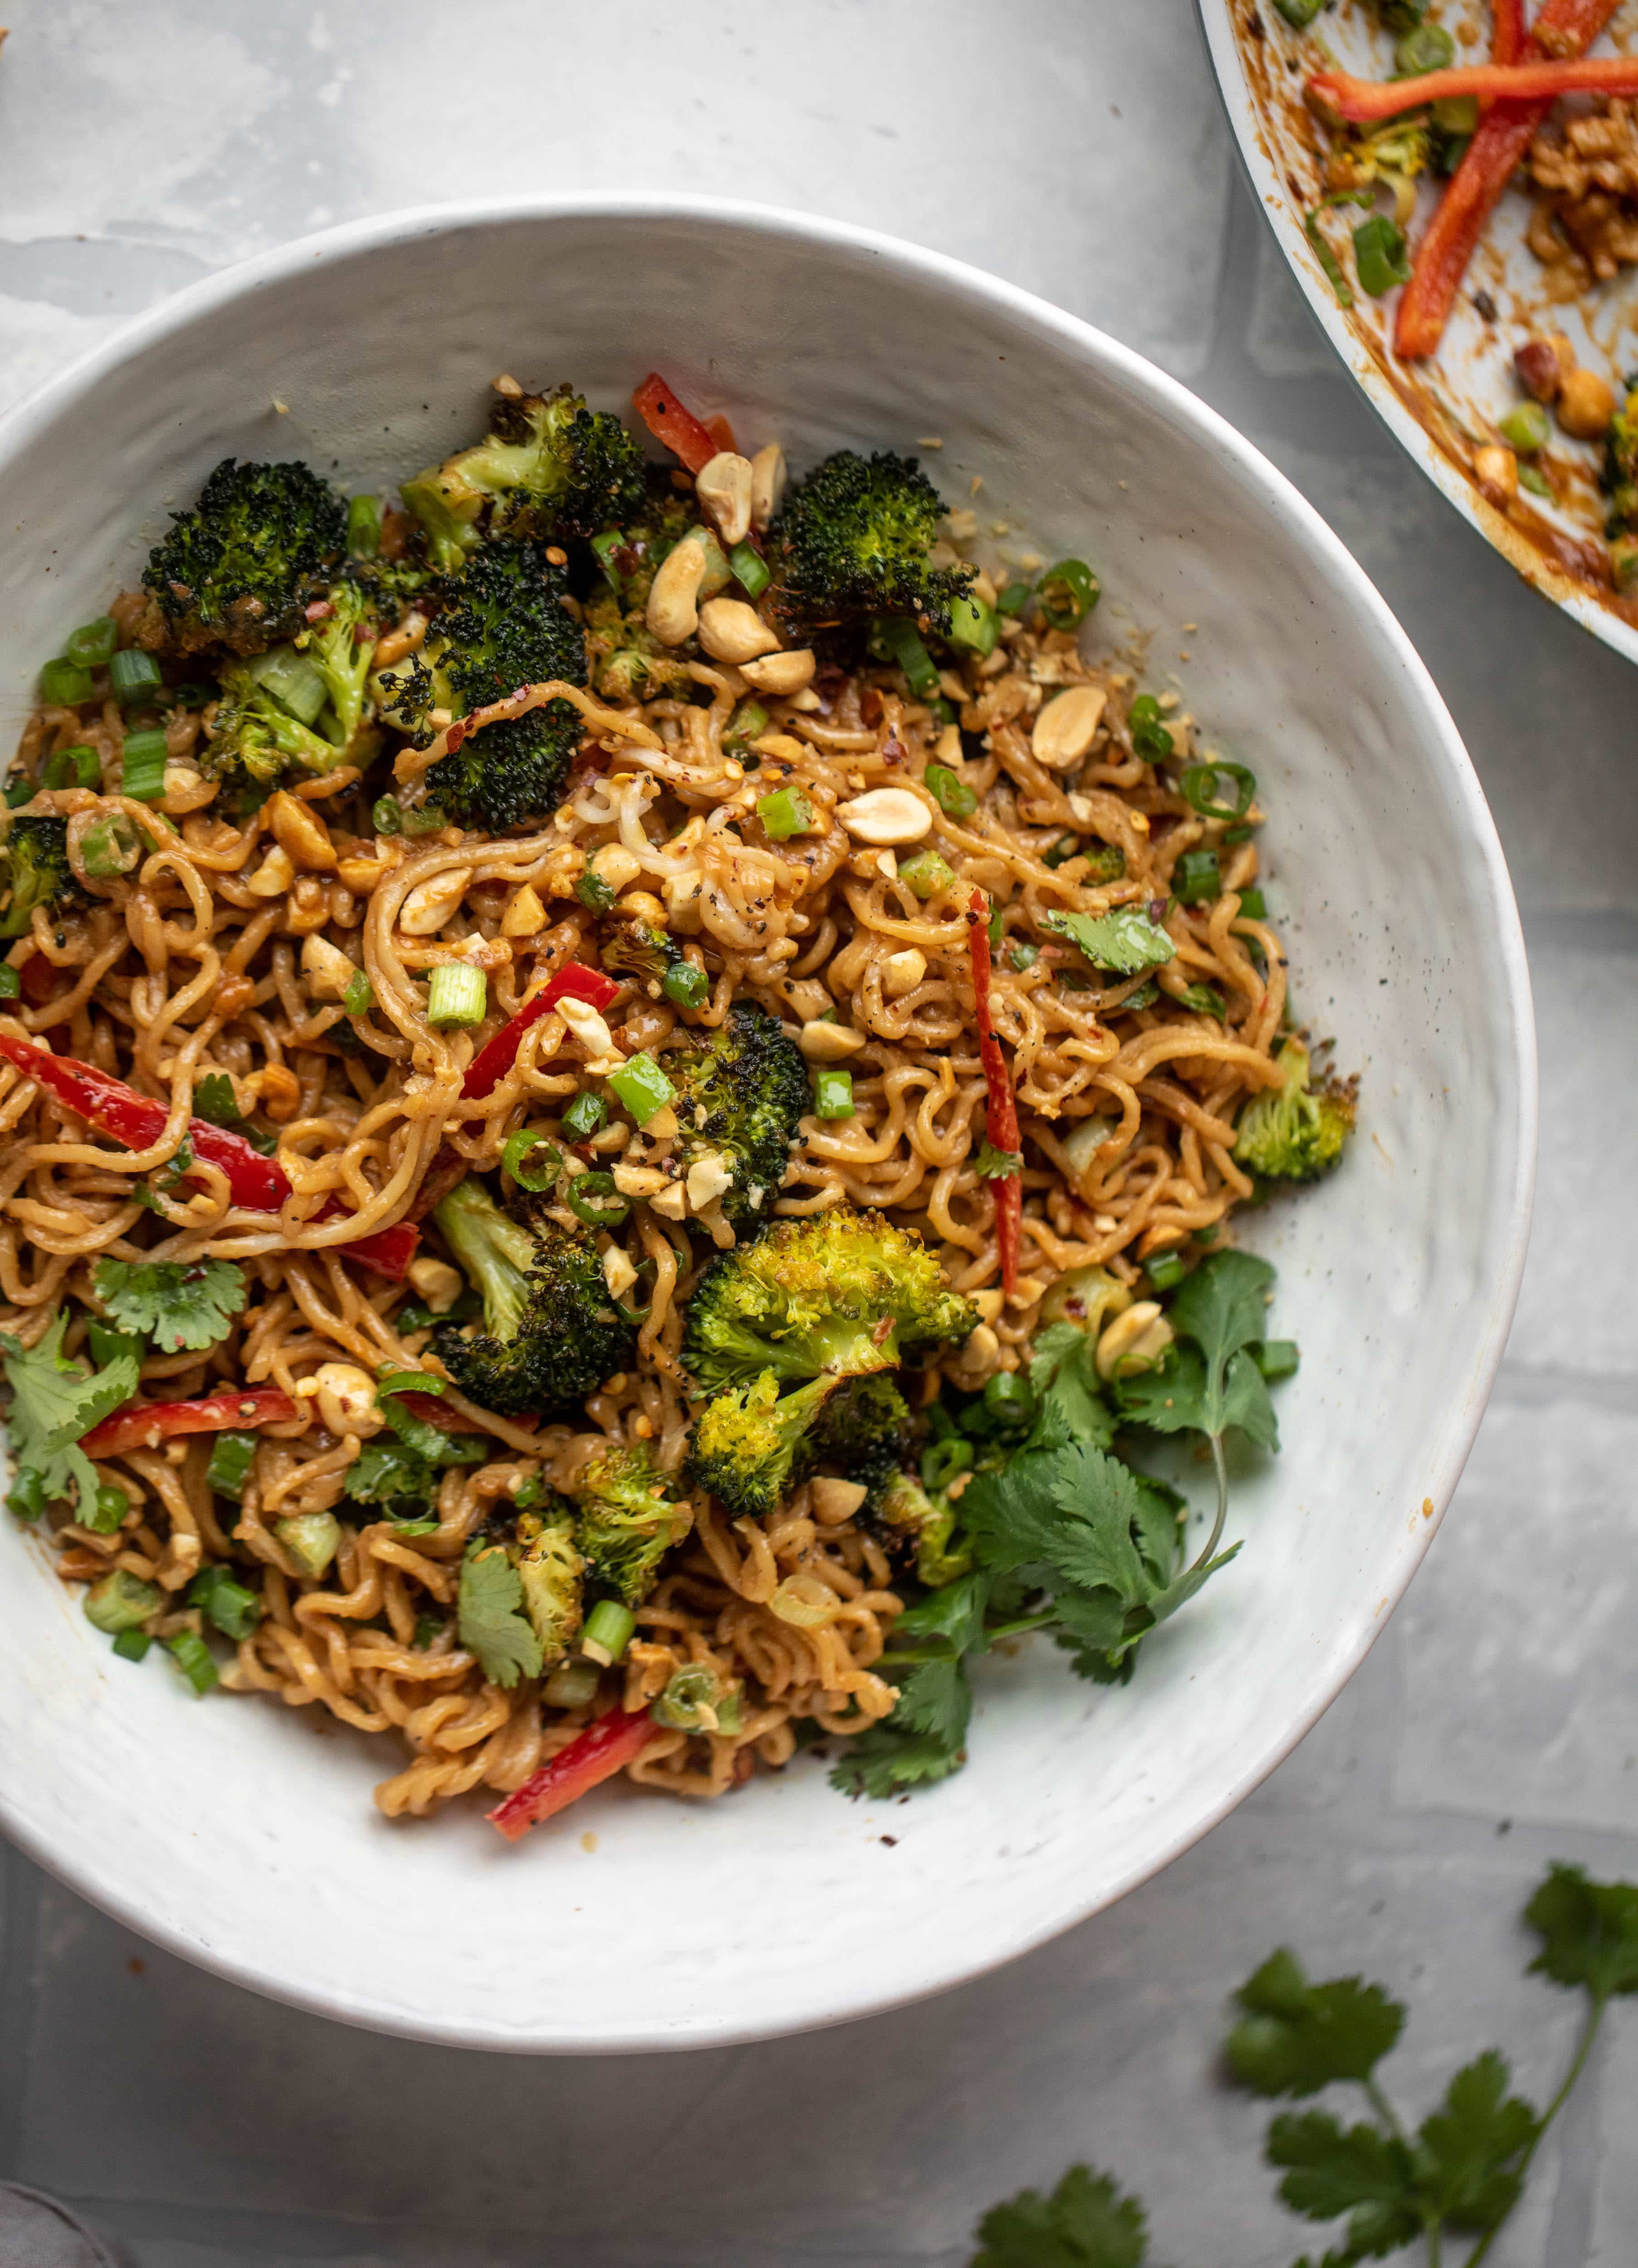 These are the most delicious peanut noodles! Tossed with roasted broccoli, red peppers, scallions, peanuts and an incredibly flavorful sauce!